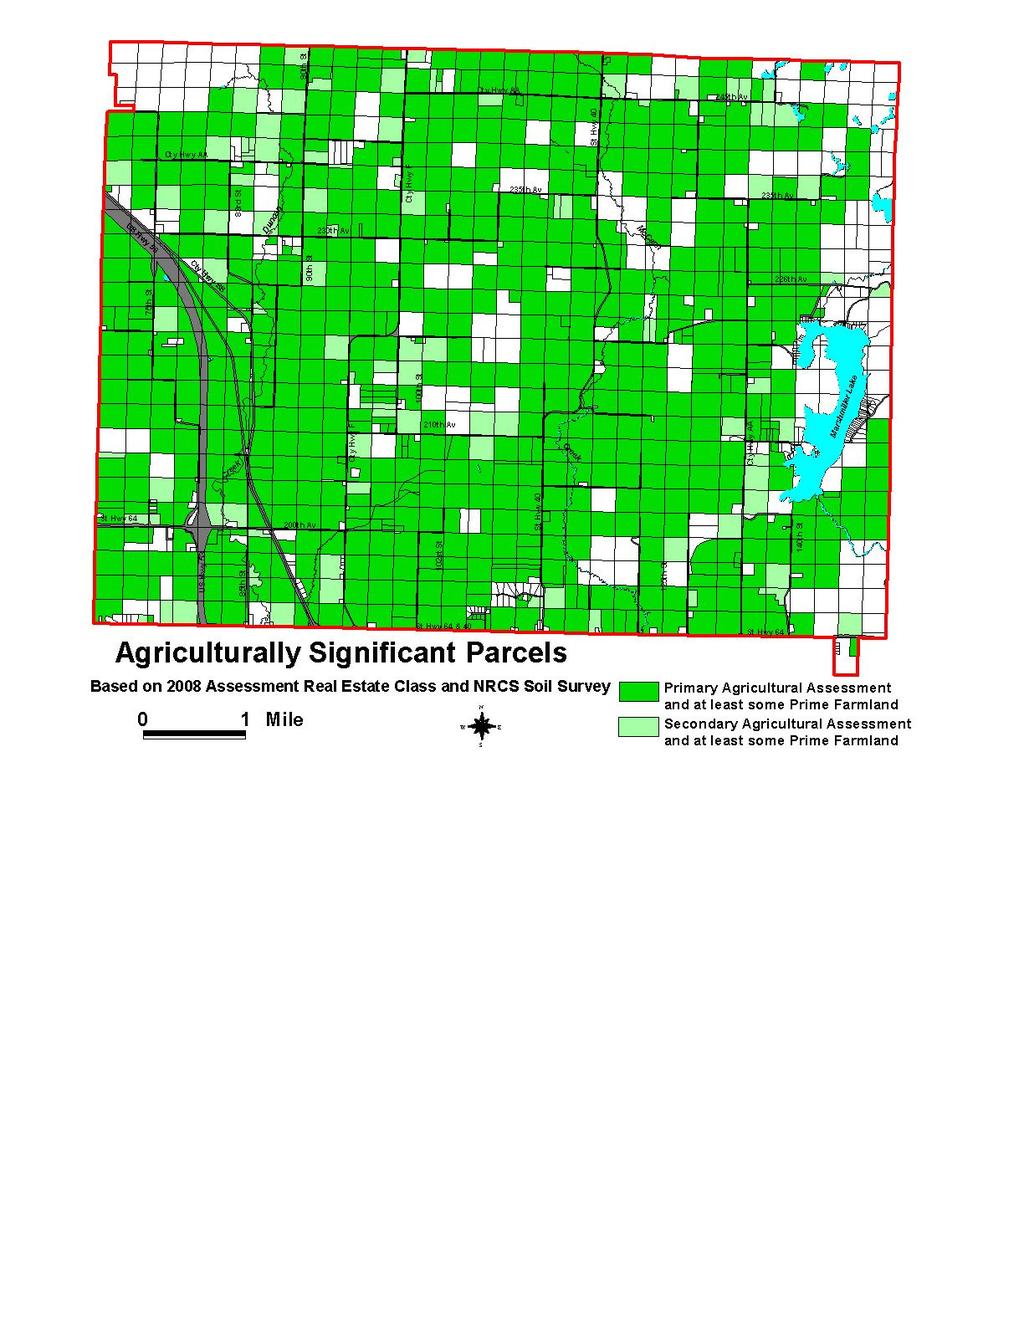 agriculture. The parcels shown should be considered for eligibility for the Working Lands Initiative programs.